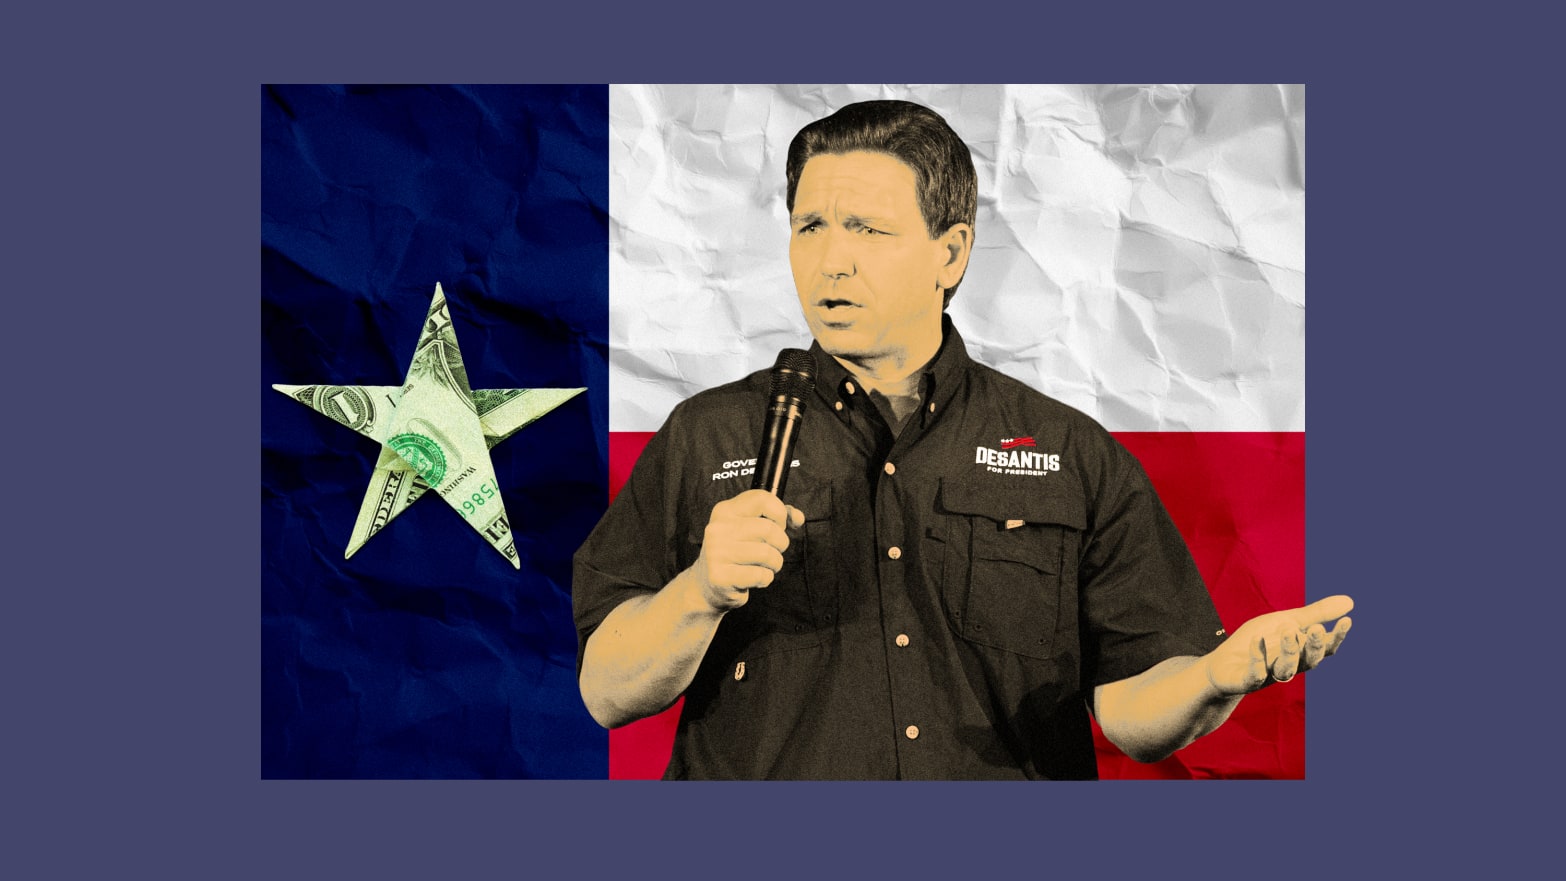 An illustration of Ron Desantis standing in front of a Texas flag.